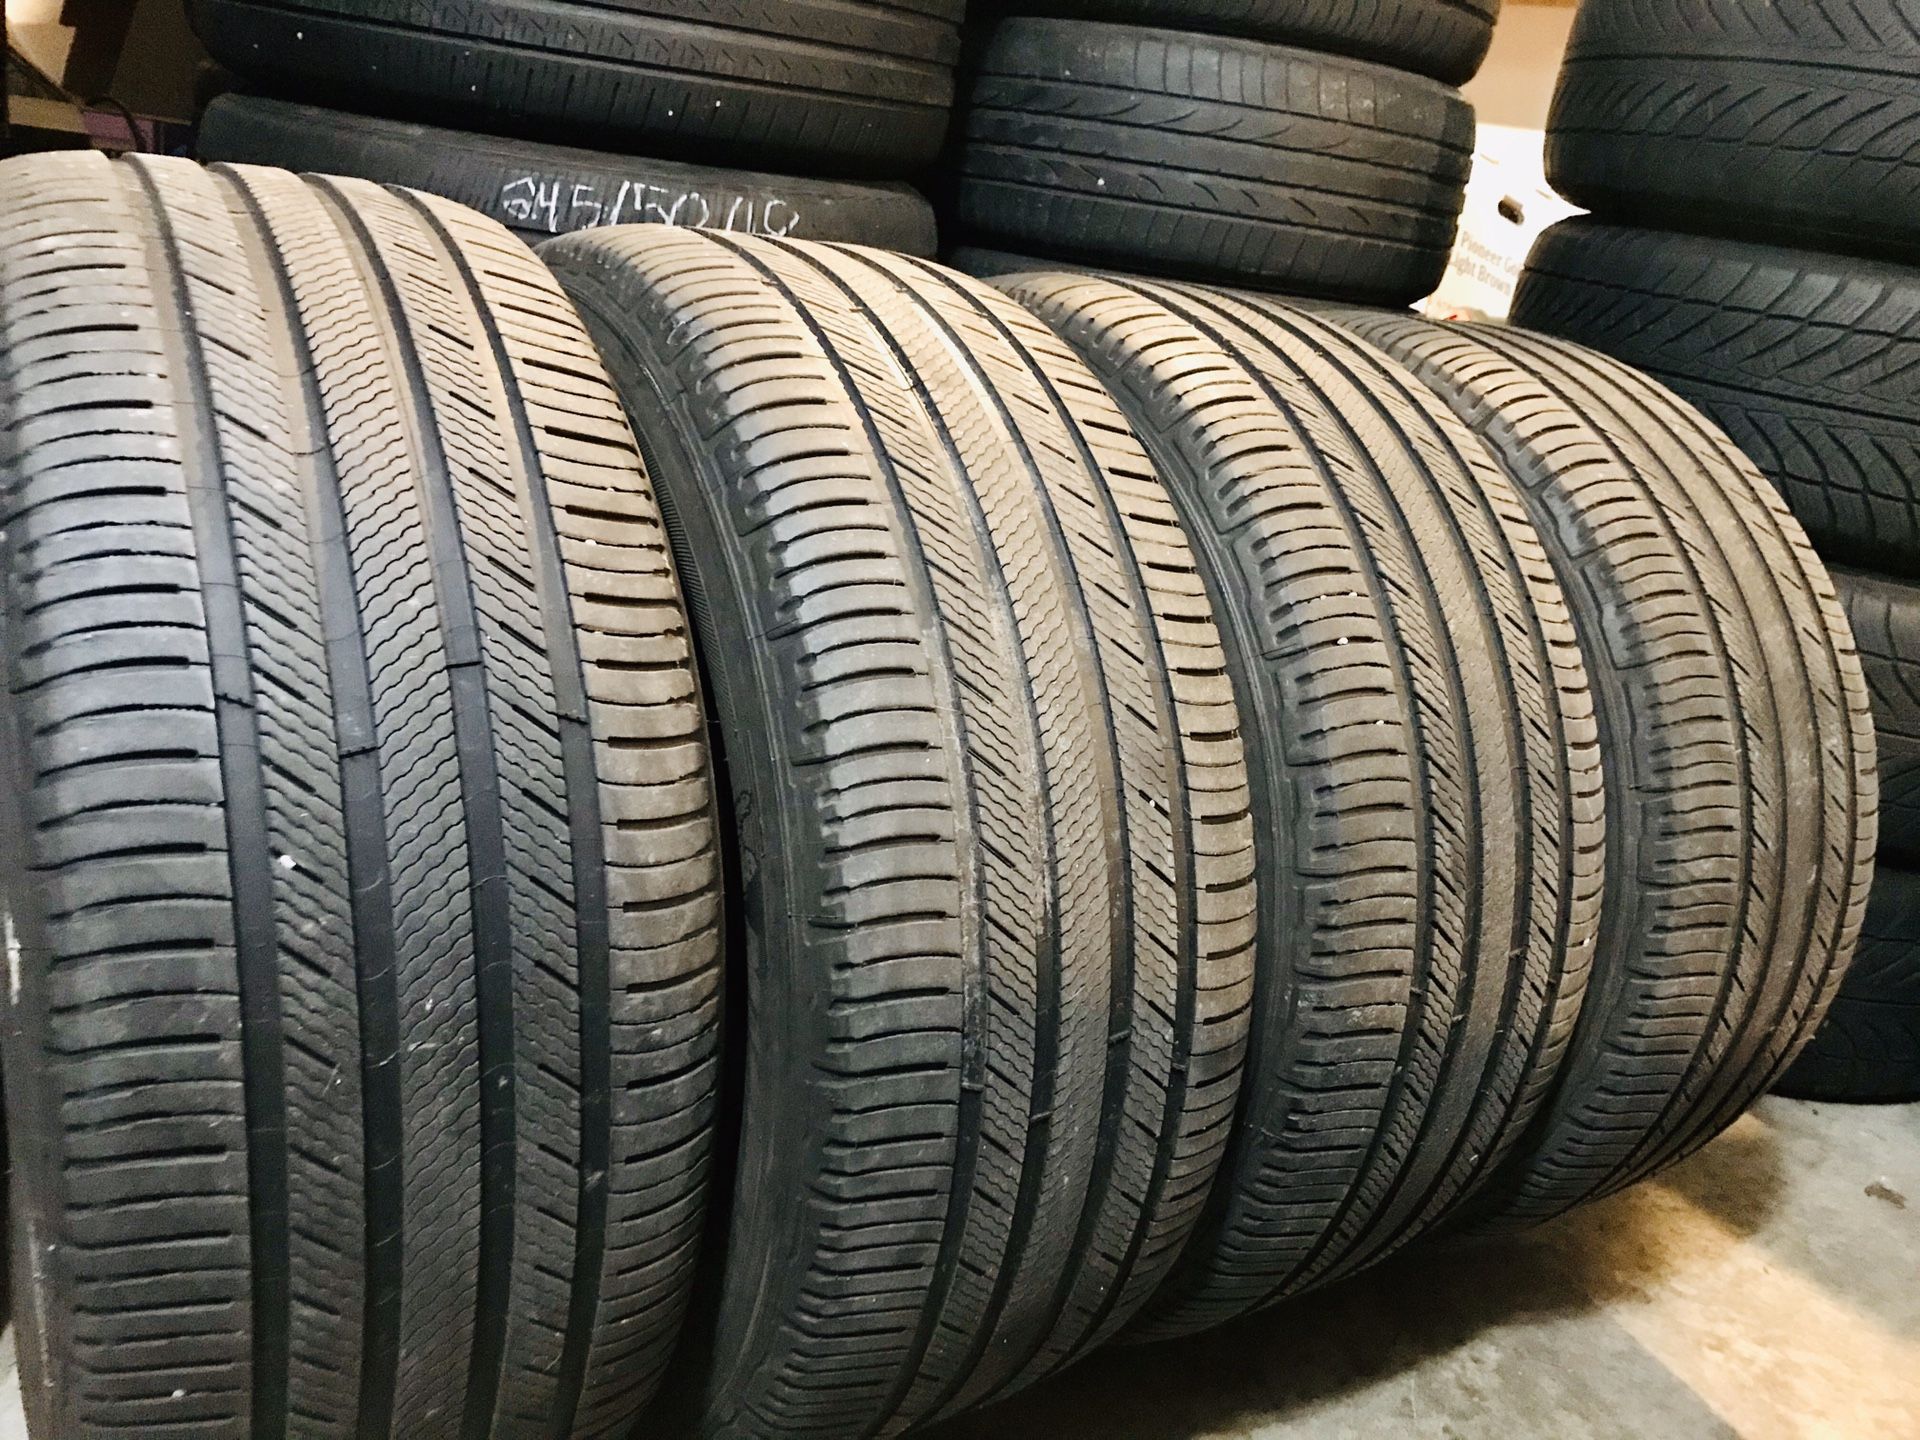 Four Matching Michelin 255/50/19 All Season Tires